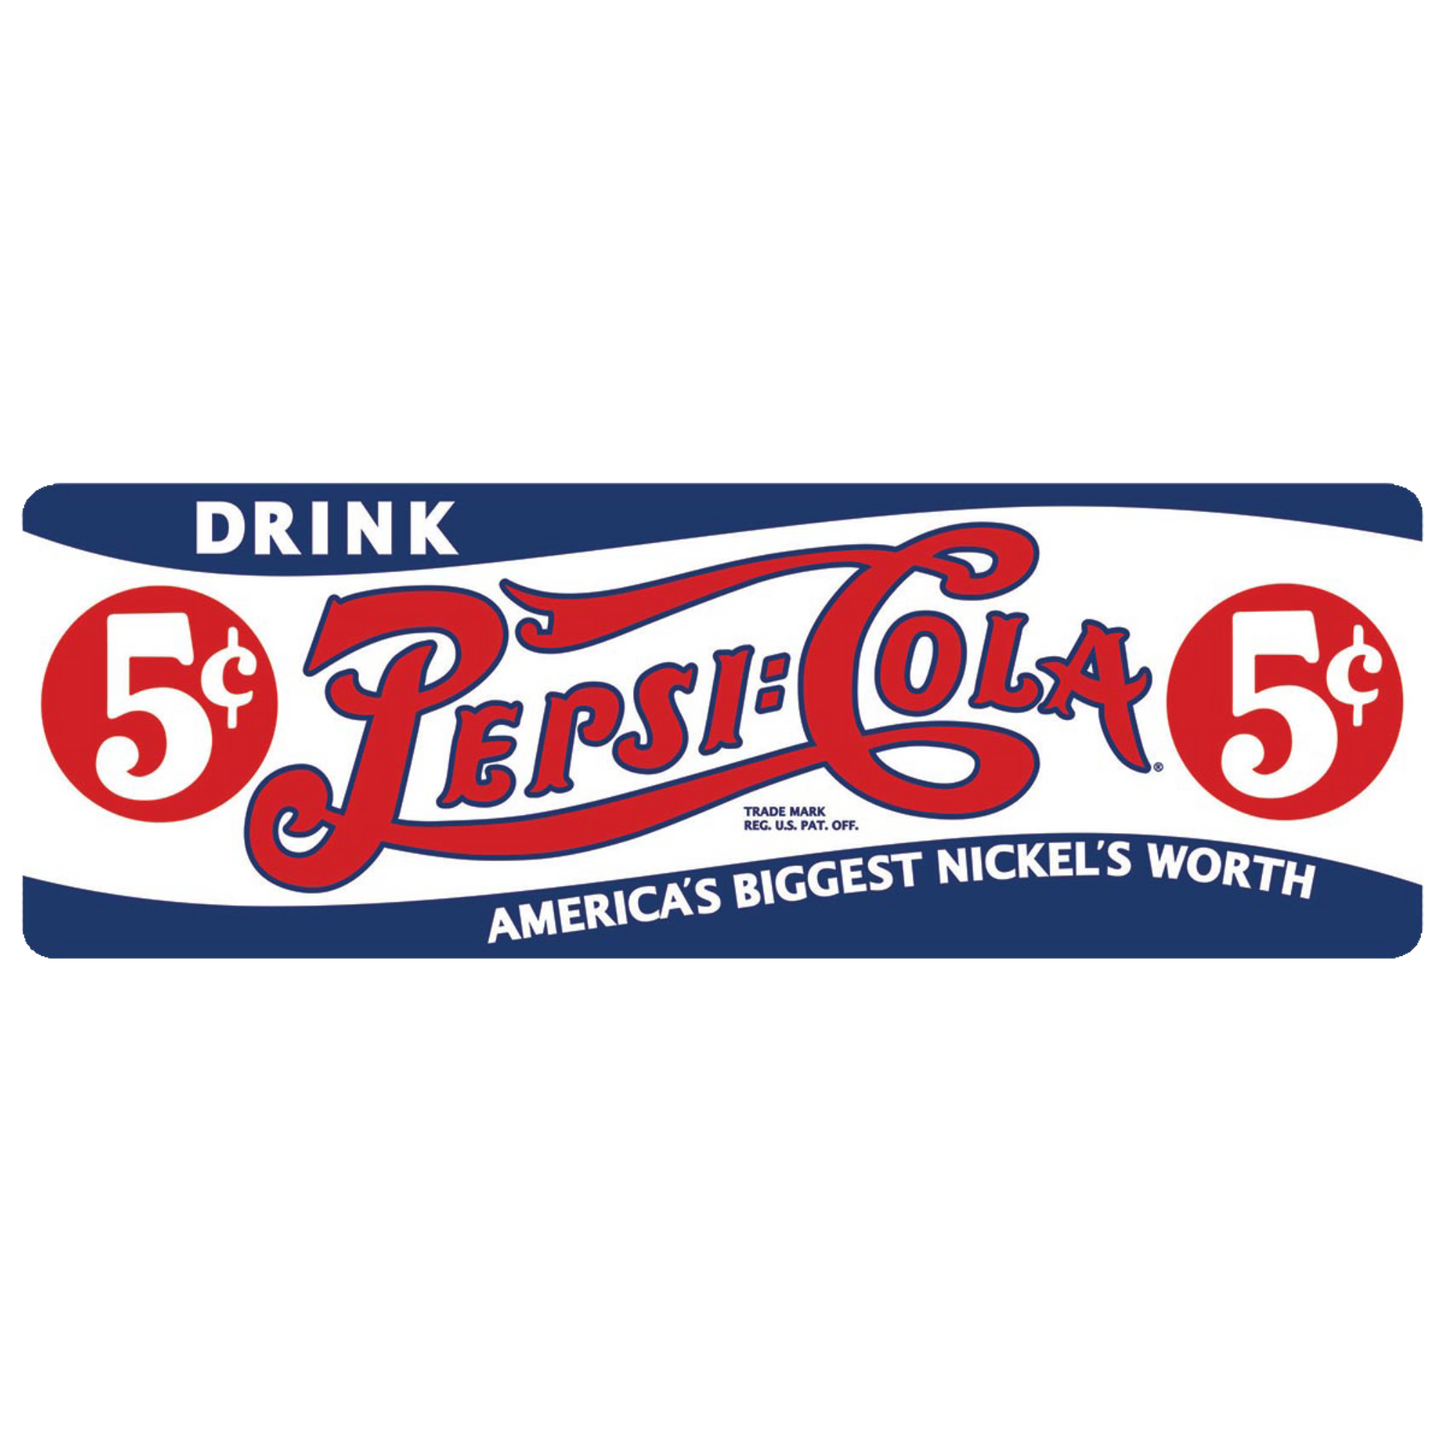 Vintage-style Pepsi-Cola tin sign with "5 cents" price tag, in red and blue colors.